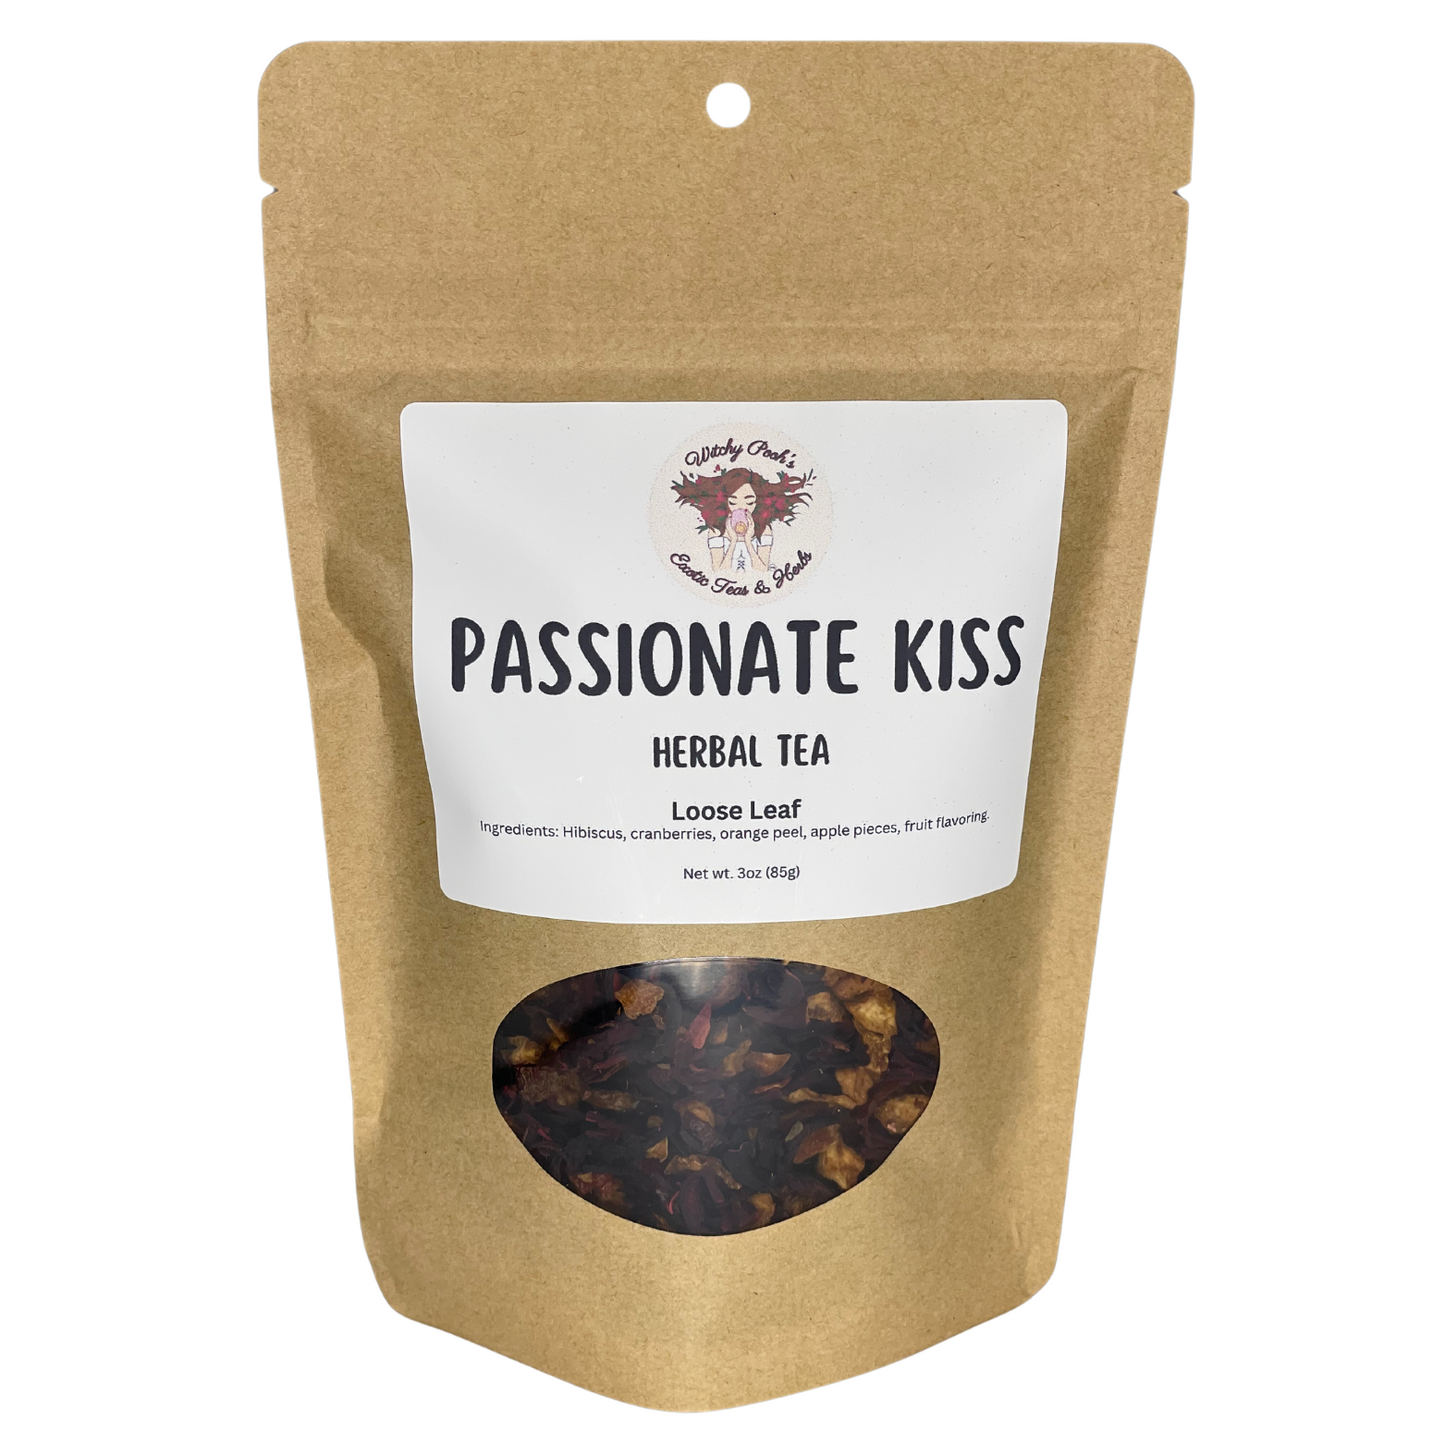 Witchy Pooh's Passionate Kiss Loose Leaf Fruit Hibiscus Herbal Tea, Caffeine Free